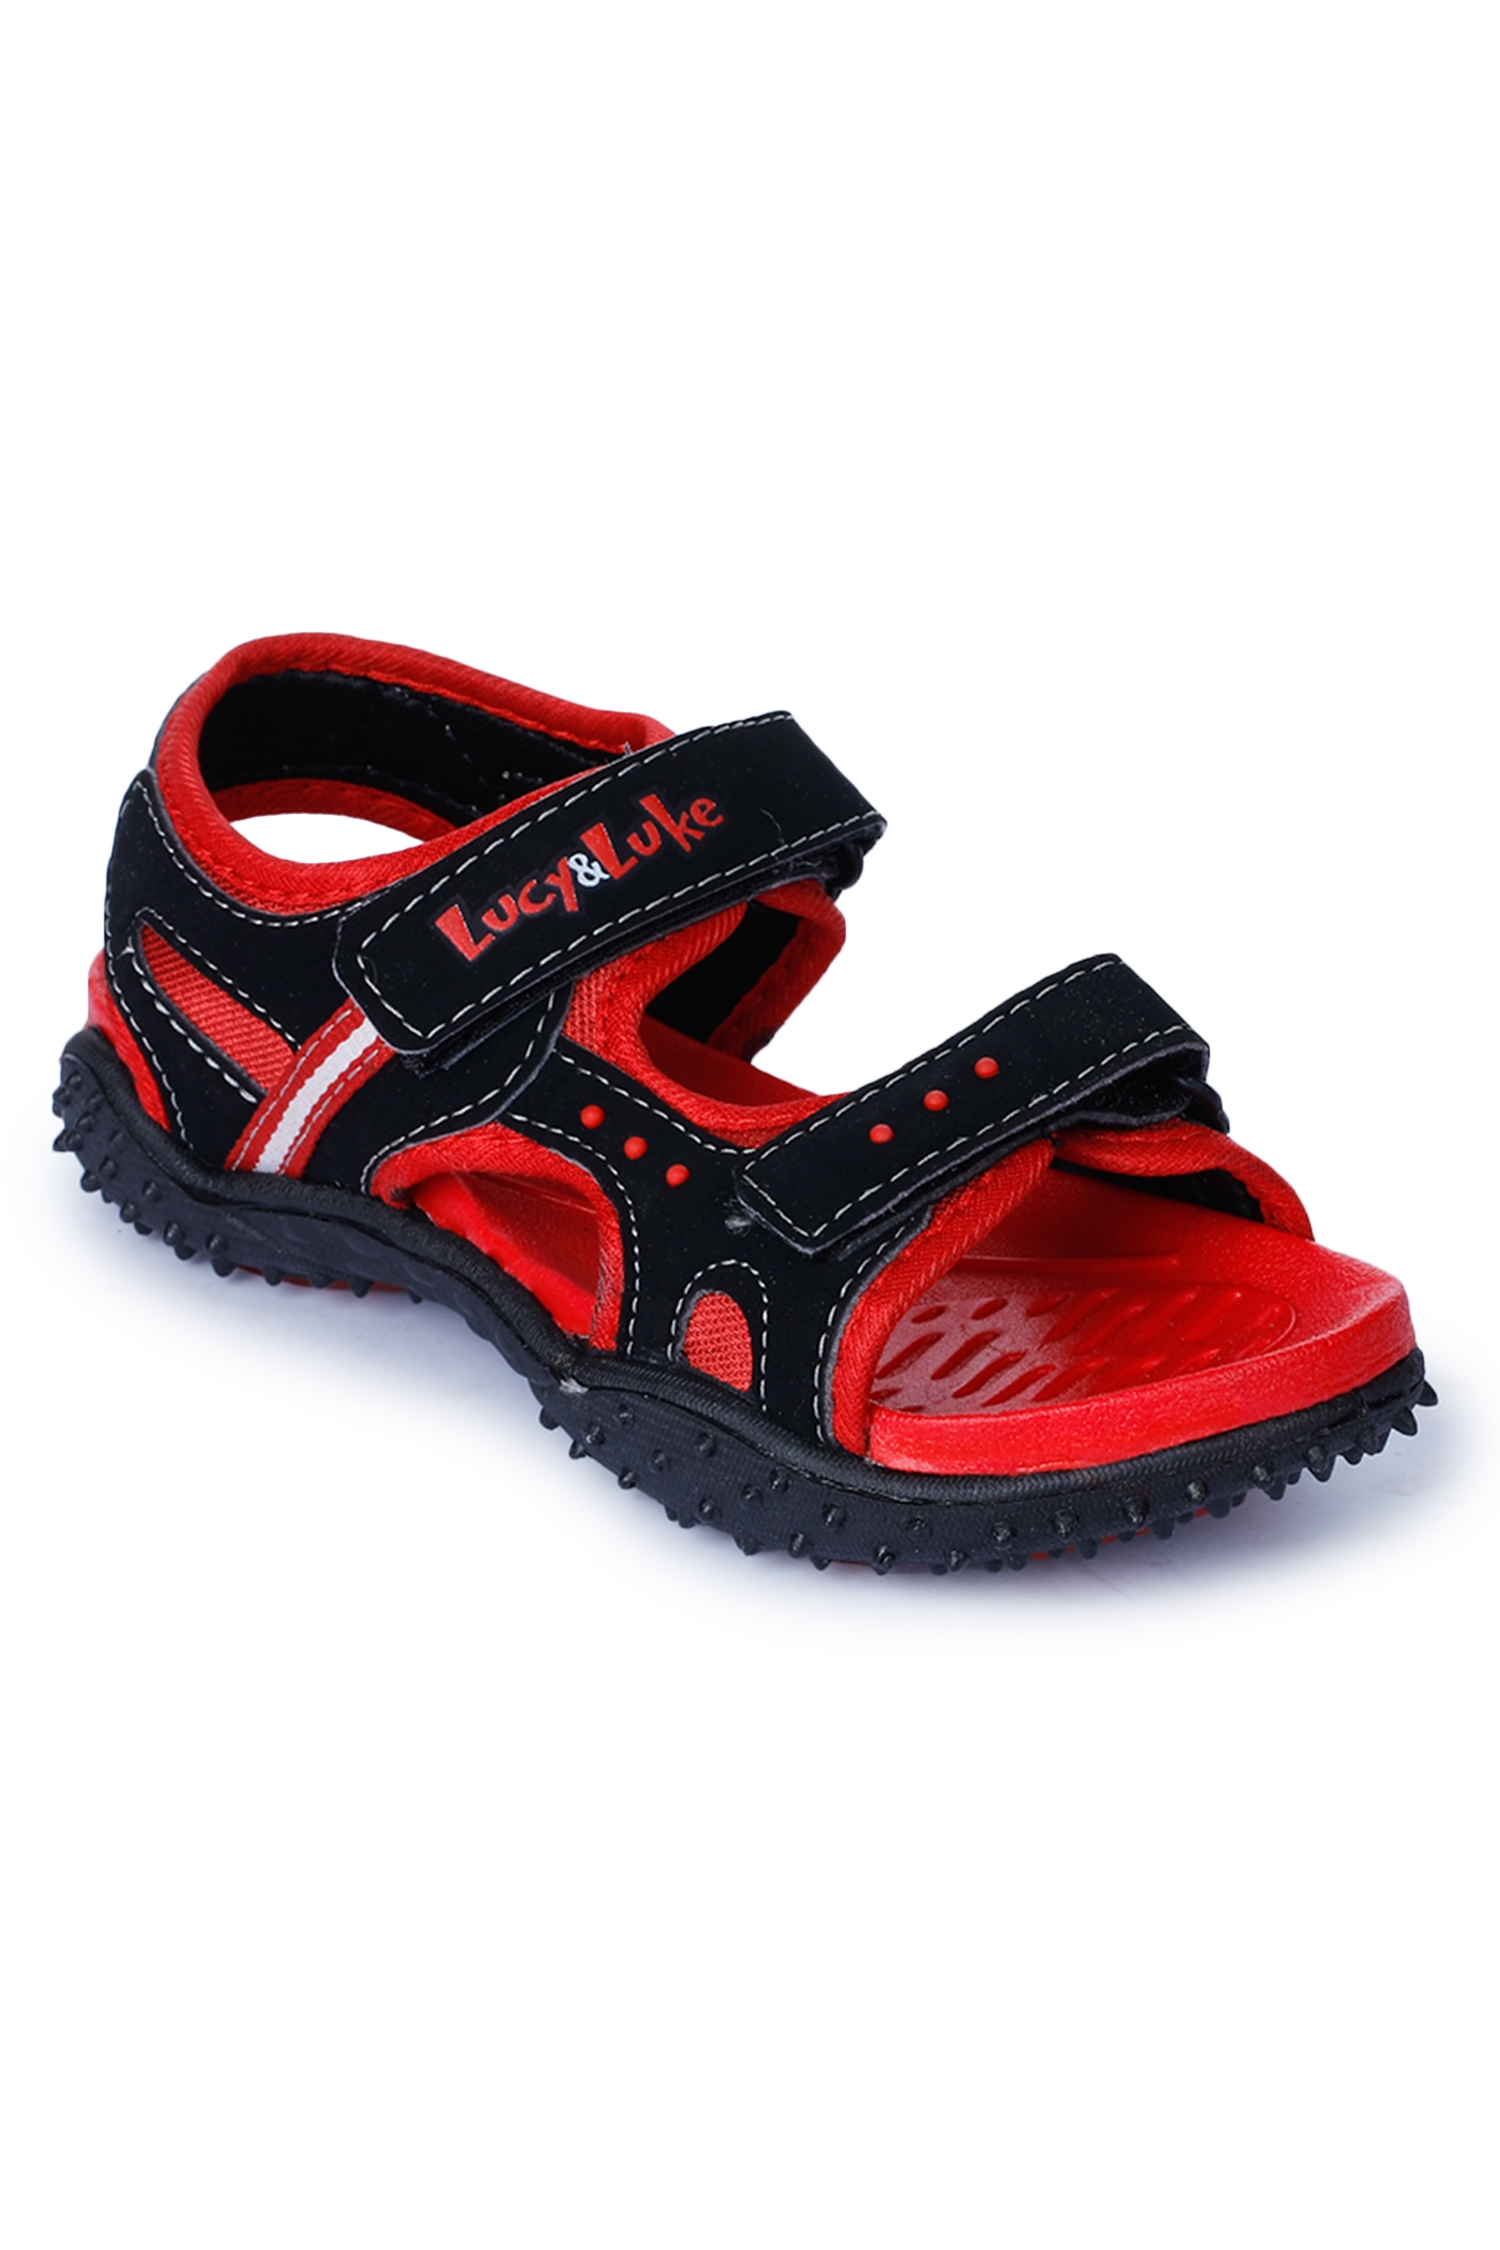 Lucy & Luke by Liberty HABANA Red Sandals for Kids